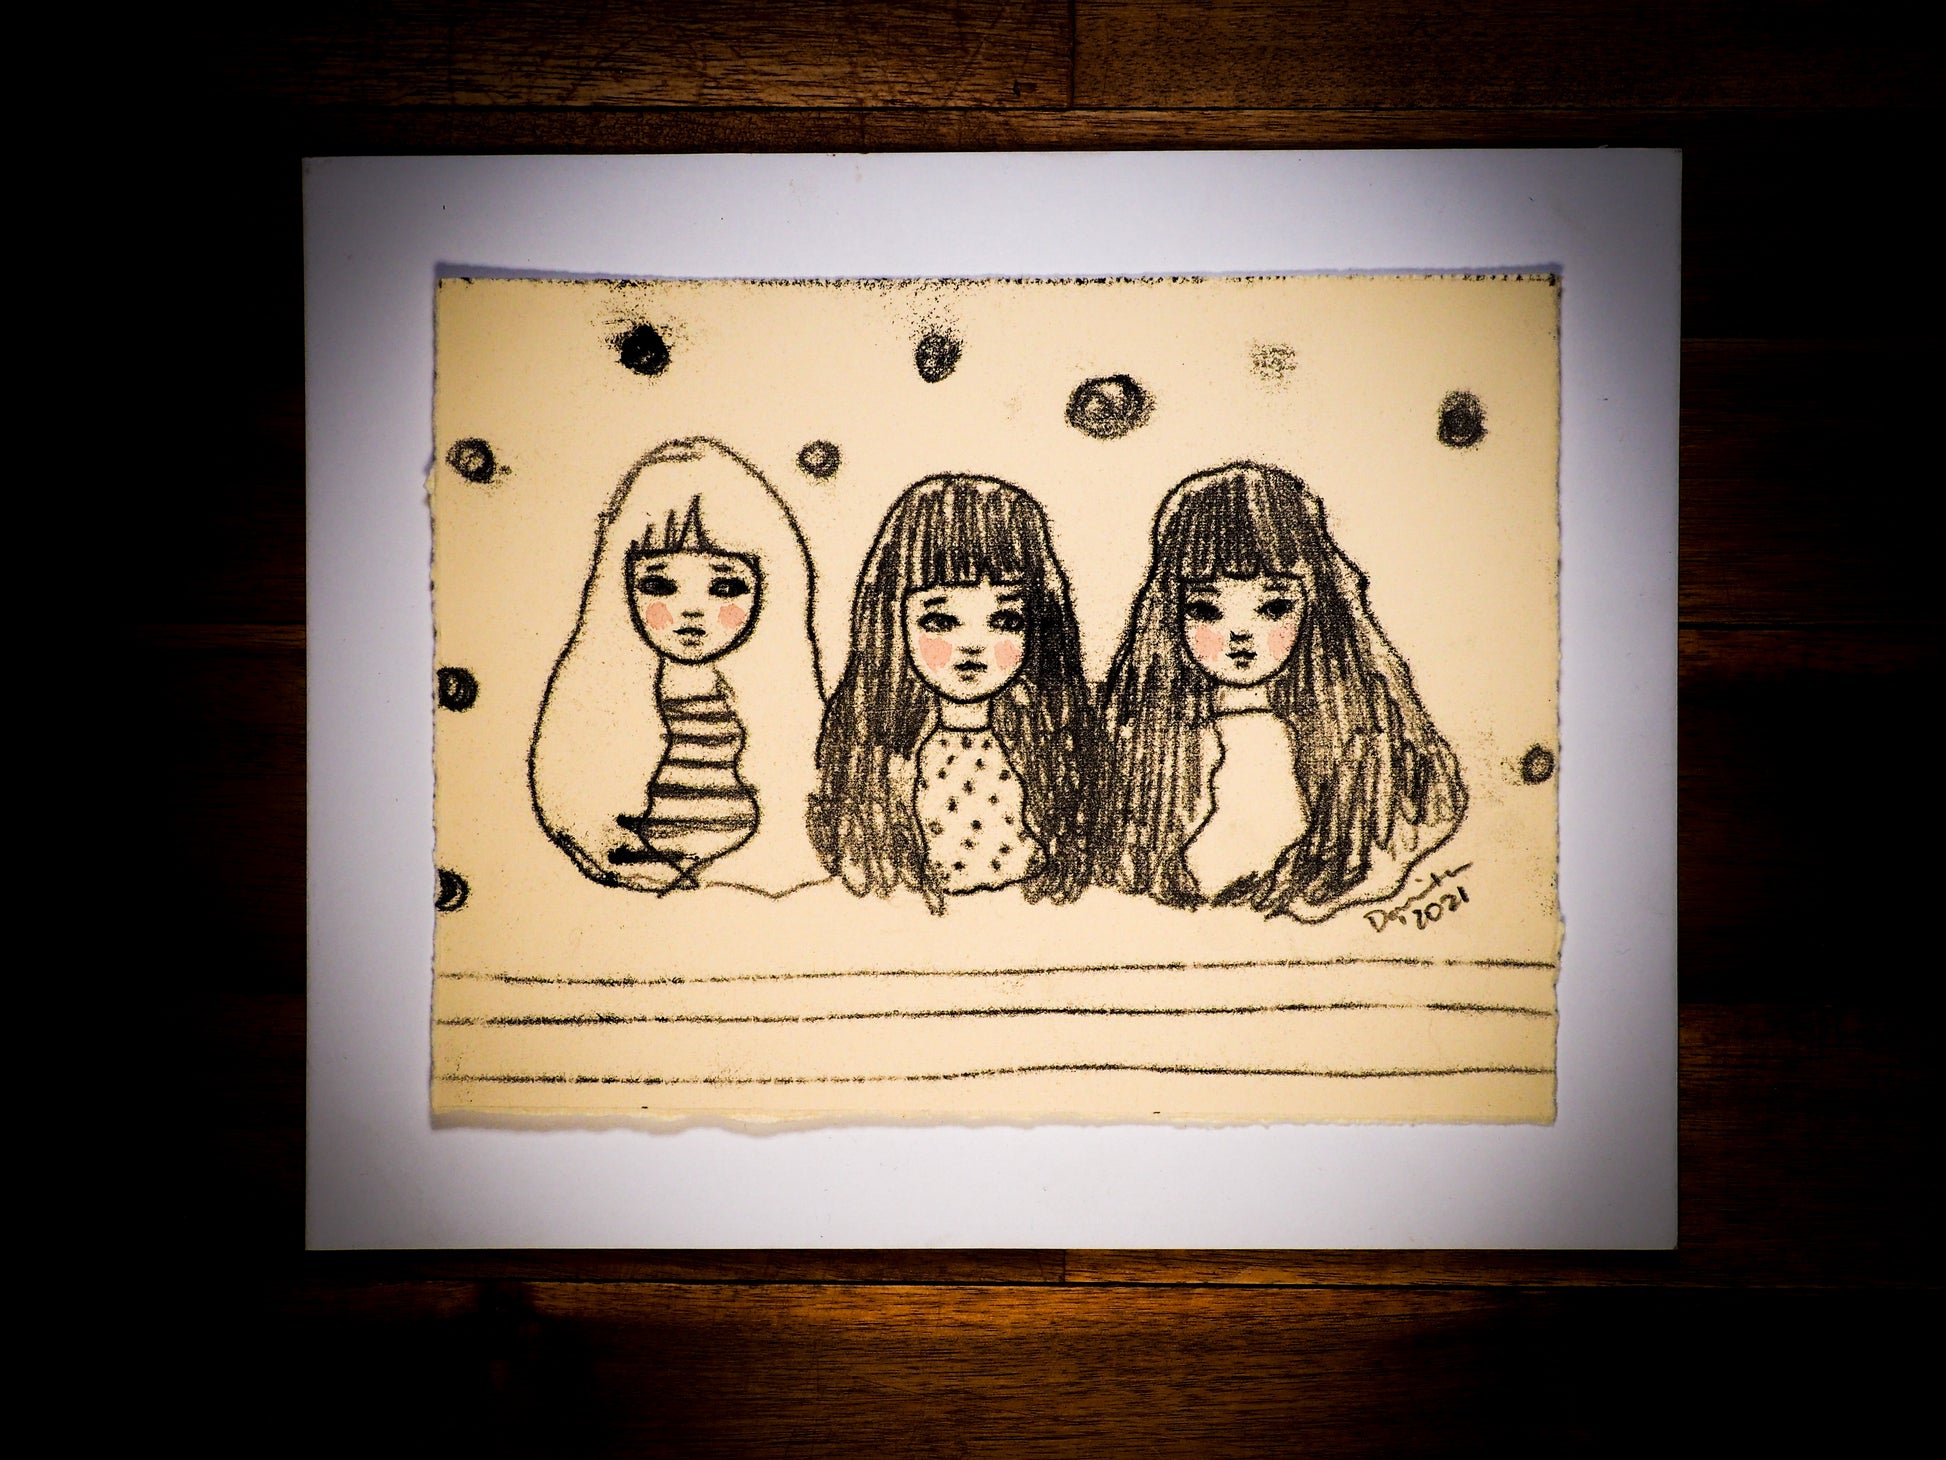 An original watercolor painting by Idania Salcido, the artist behind Danita Art.  This is a beautiful monoprint, a one of a kind ink and vintage paper original art creation depicting there girls, my sisters and me, painted on a mid 20th century ledger sheet with typewriter characters. 